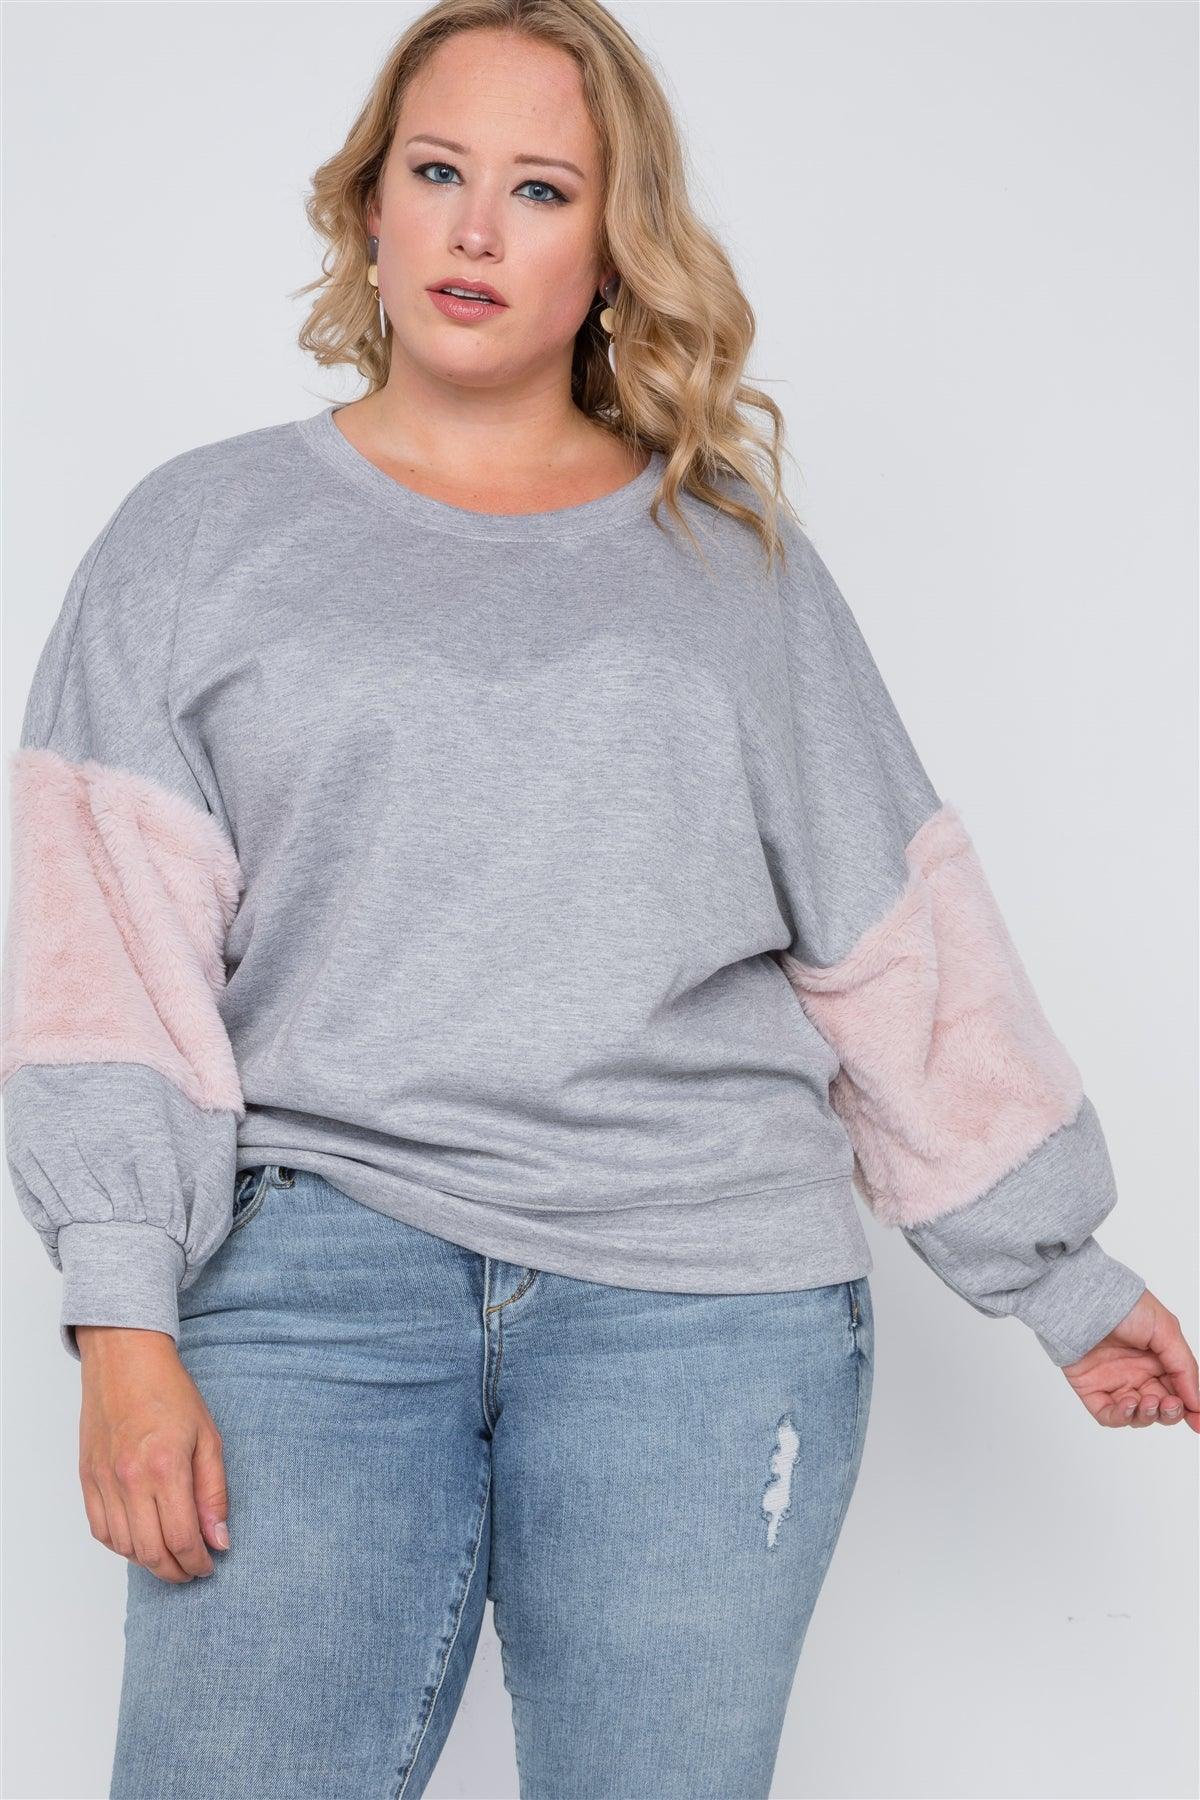 Plus Size Heather Grey Faux Fur Pink Sleeves Sweater /1-1-1